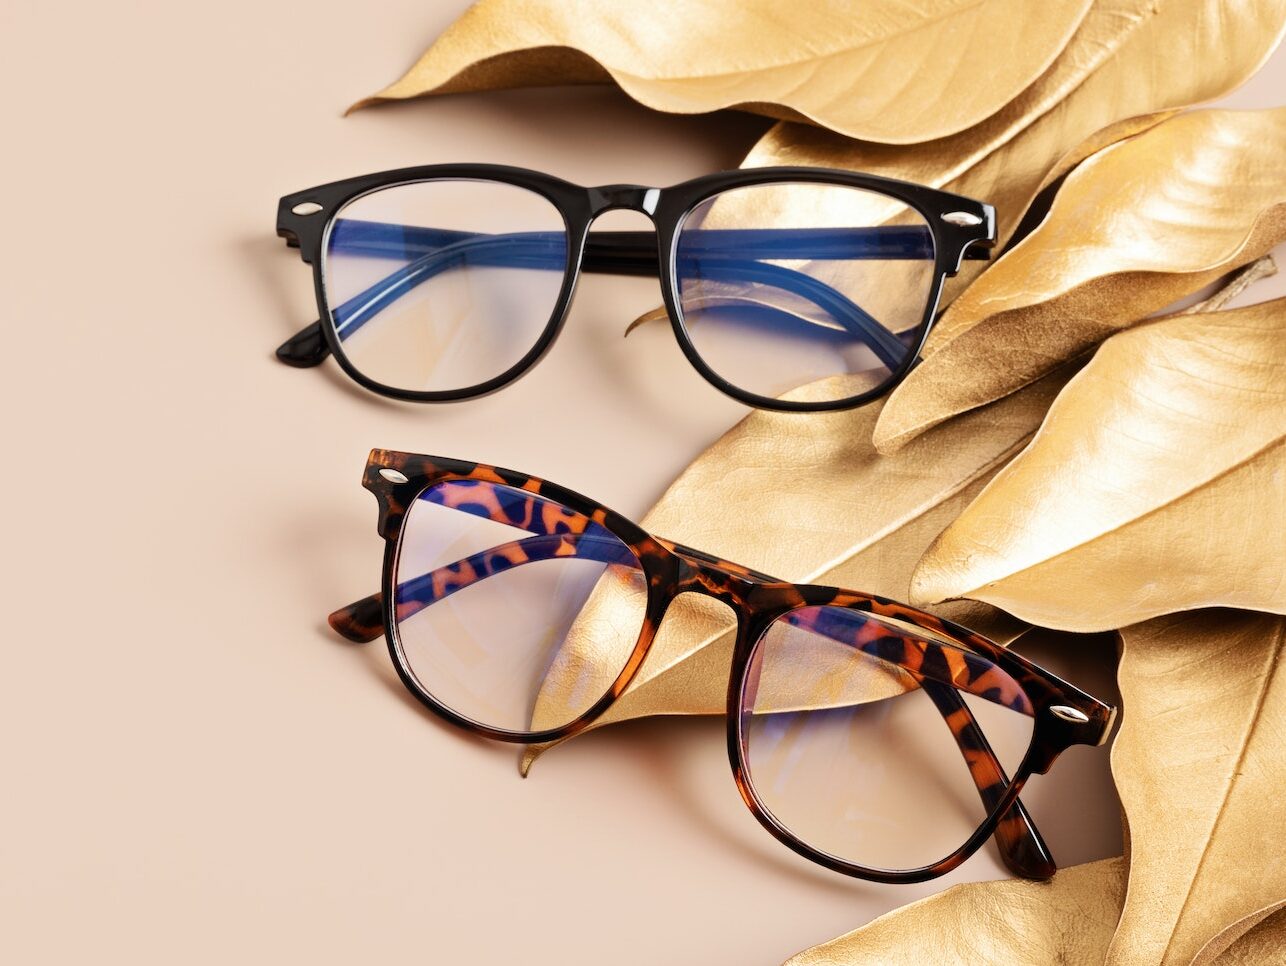 Stylish eyeglasses. Optical store, glasses selection at optician, fashion accessories